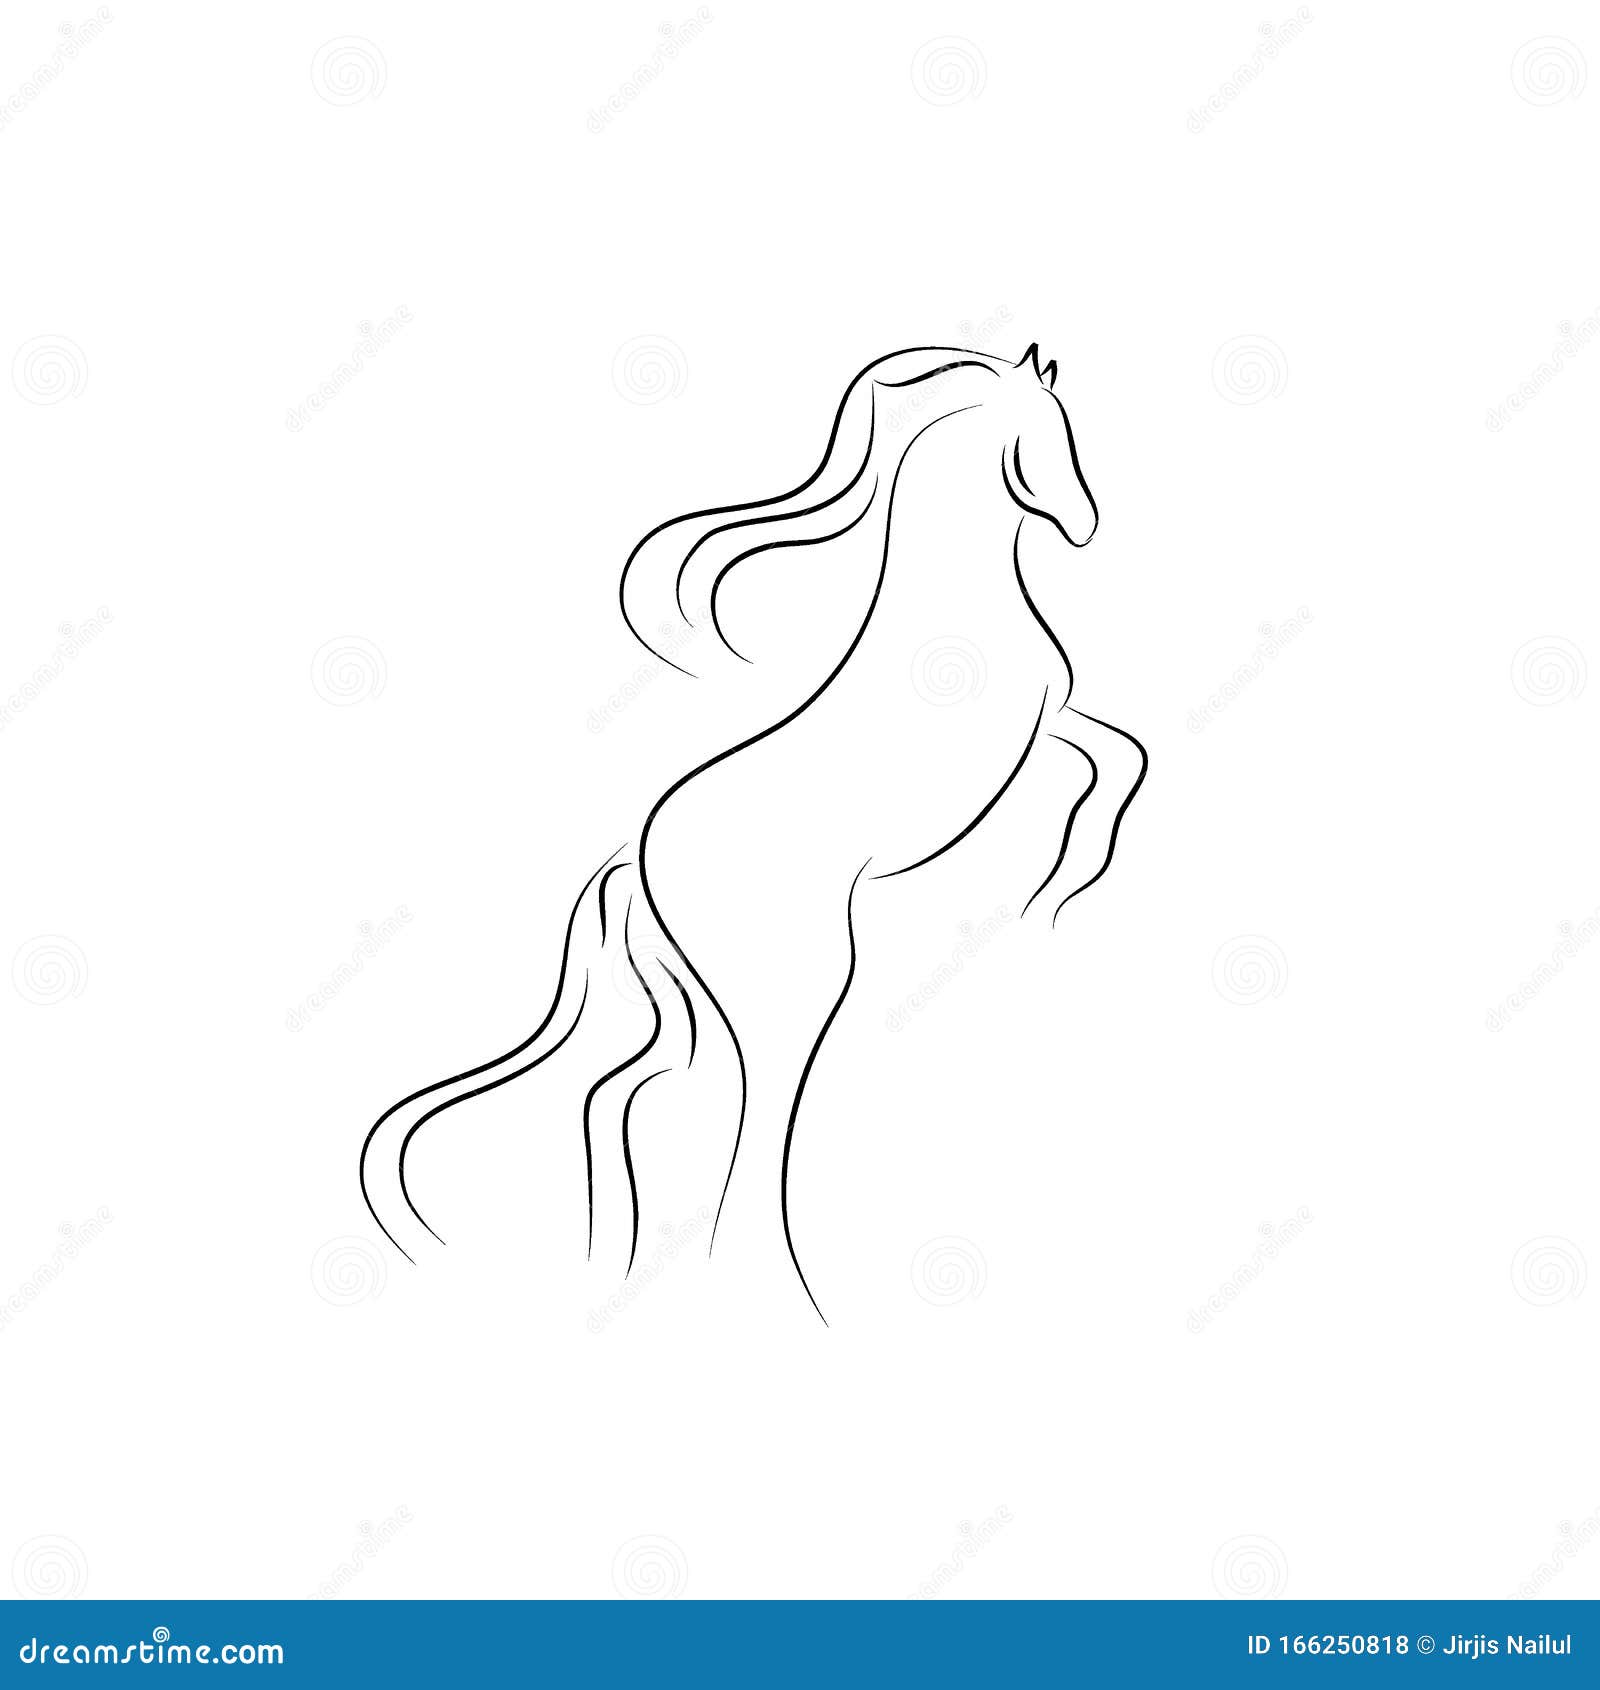 One Line Horse Design  Drawn Minimalism Style Vector  Illustration Stock Illustration - Illustration of power, nature: 166250818